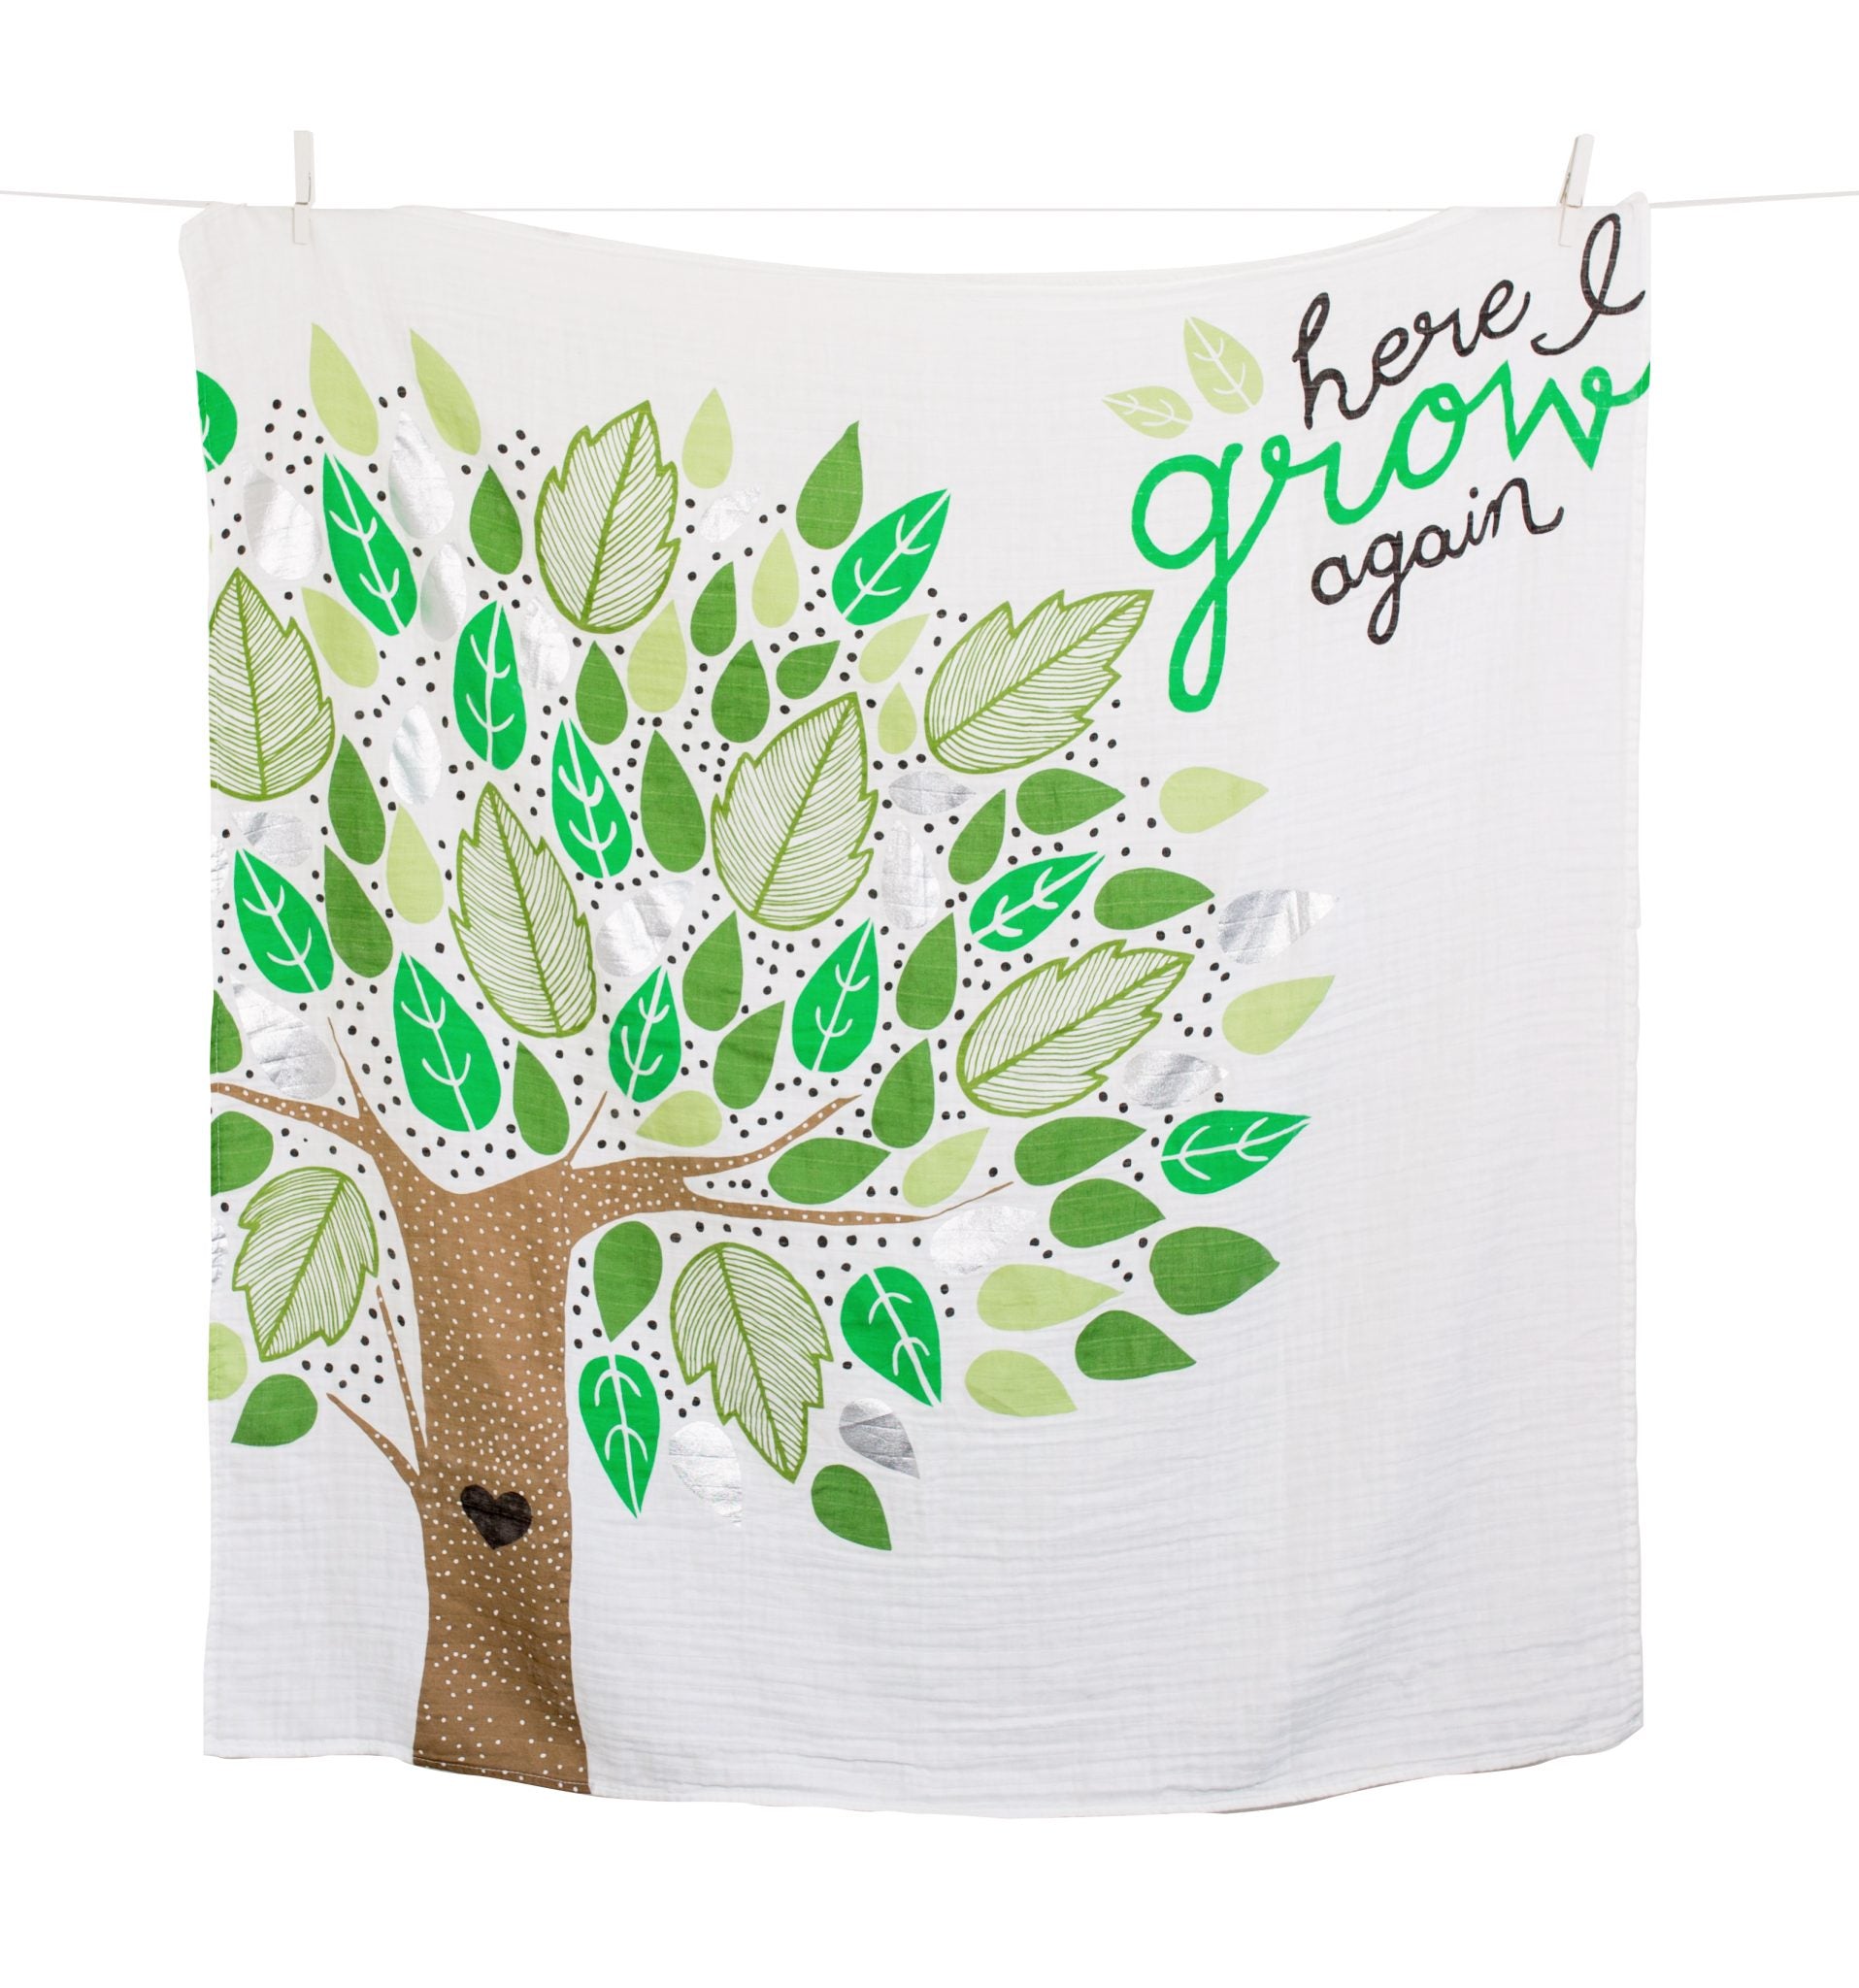 here i grow again milestone blanket hanging on a close line against a white background